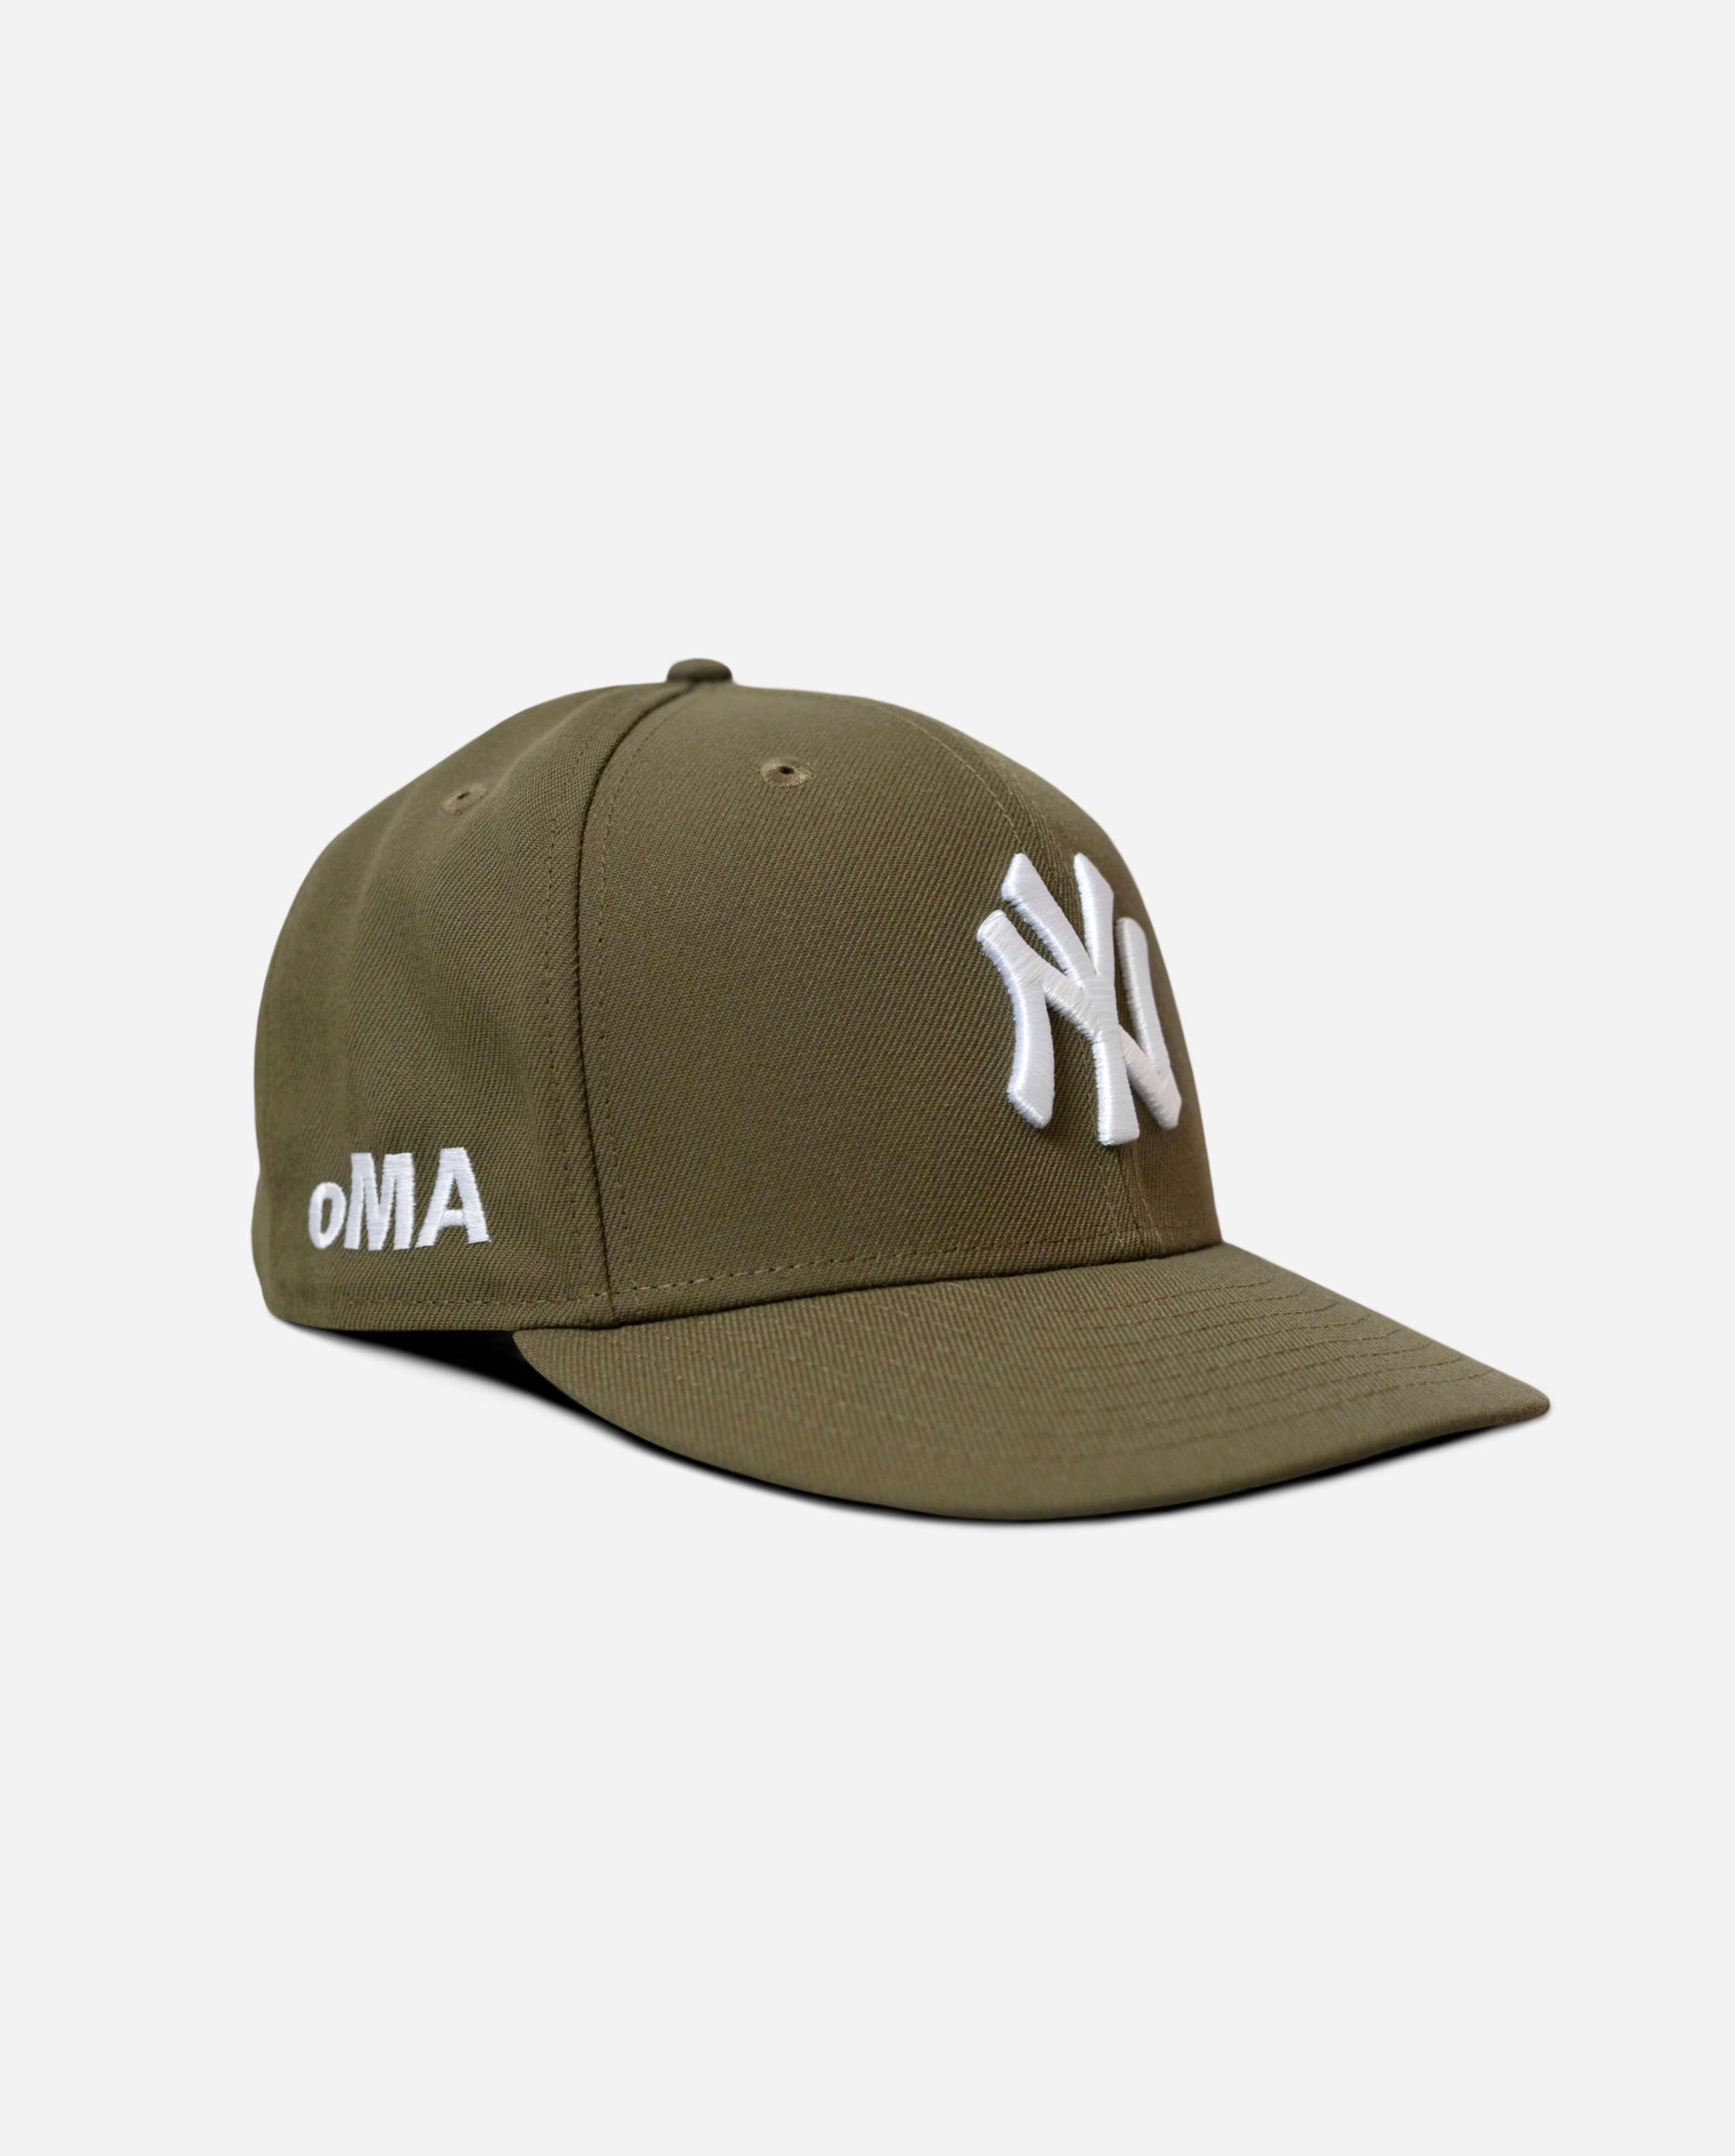 oMA OLIVE NEW YORK YANKEES FITTED HAT (SAMPLE)